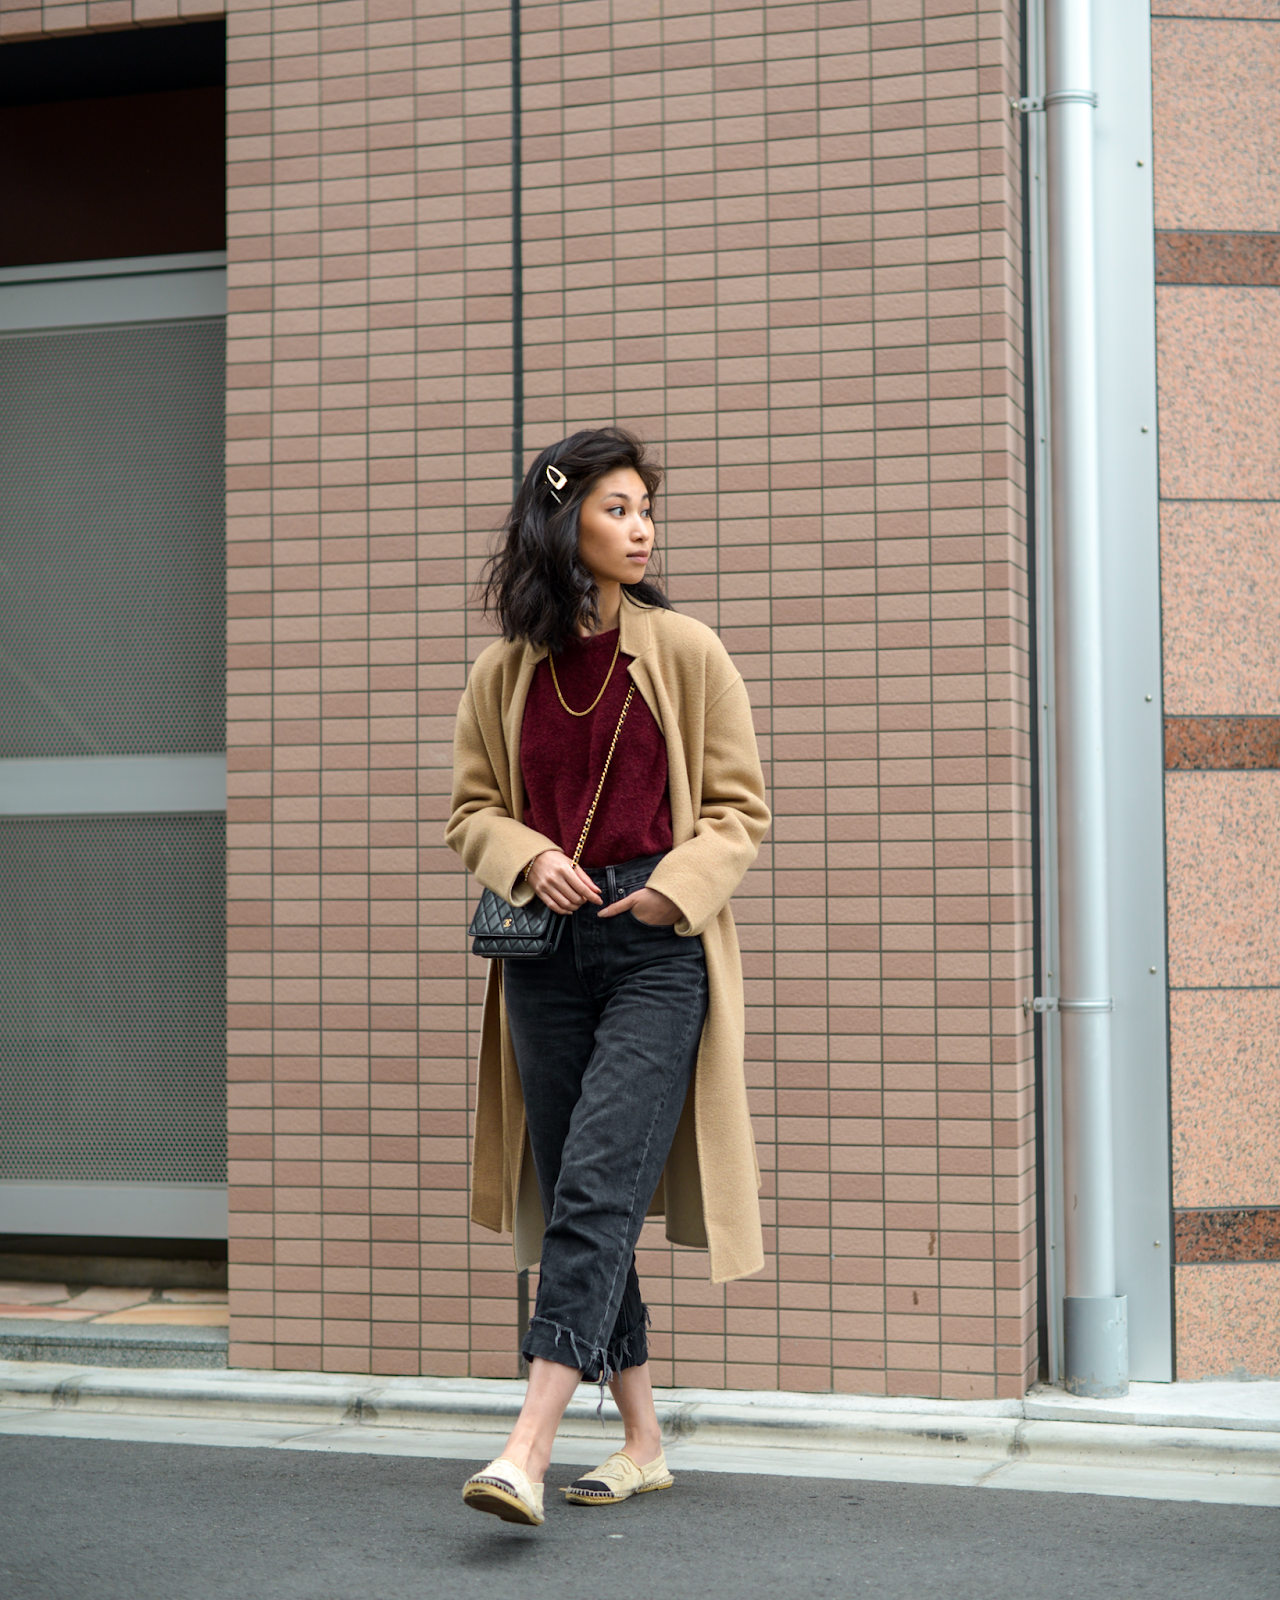 Camel and maroon outfit, Spring transitional outfit, hair pin trends, casual ways to wear hair barrettes, Tokyo based personal style blogger FOREVERVANNY